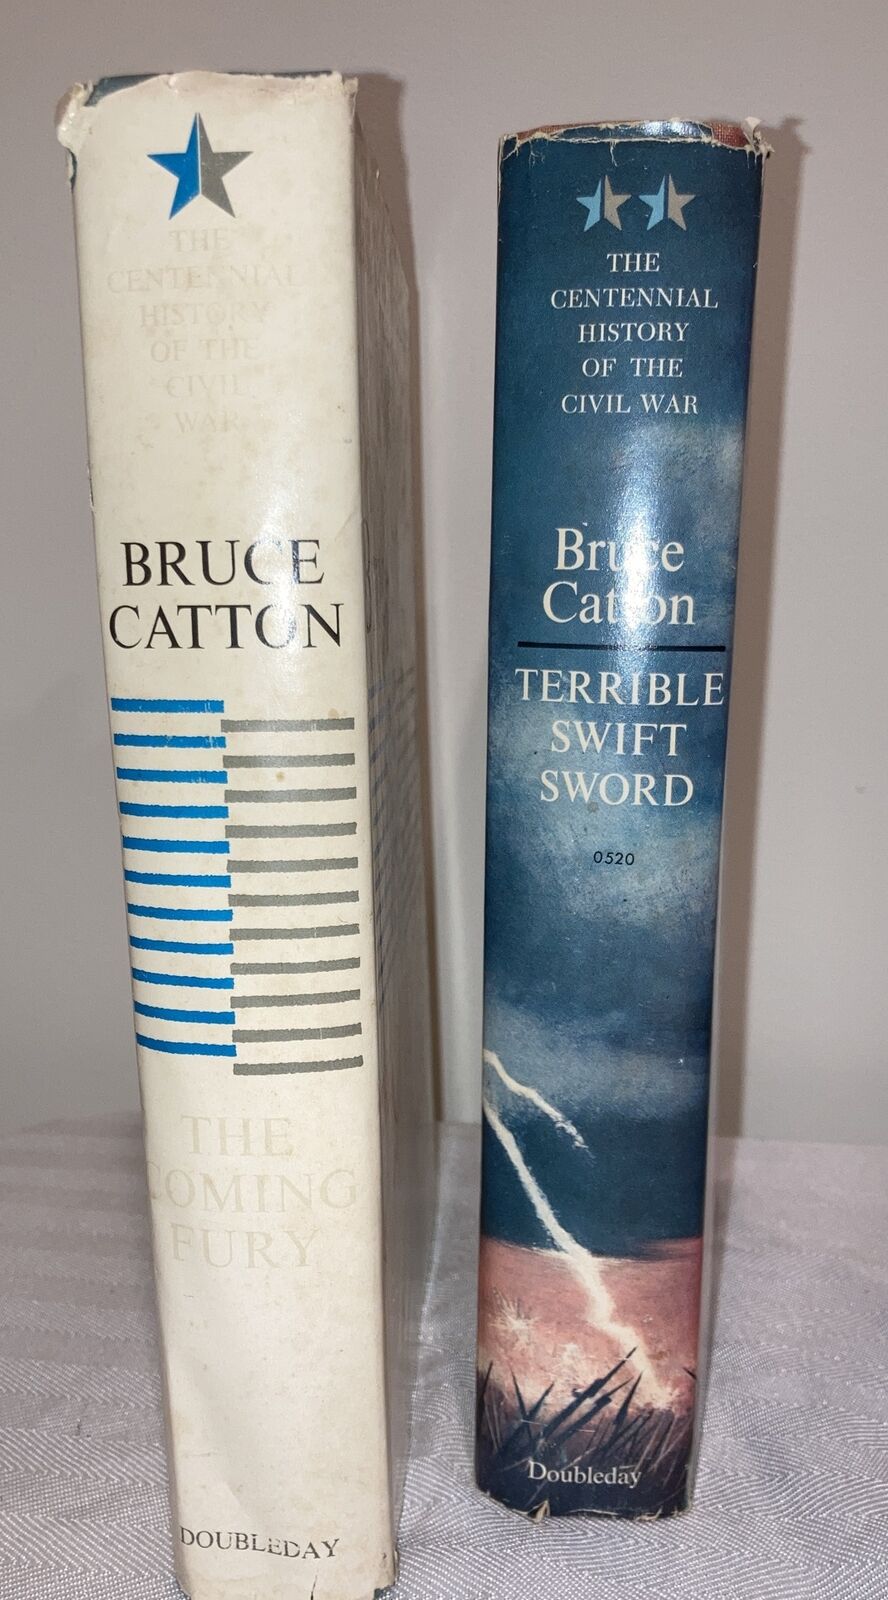 Bruce Catton Civil War: The Coming Fury And Terrible Swift Sword First Editions